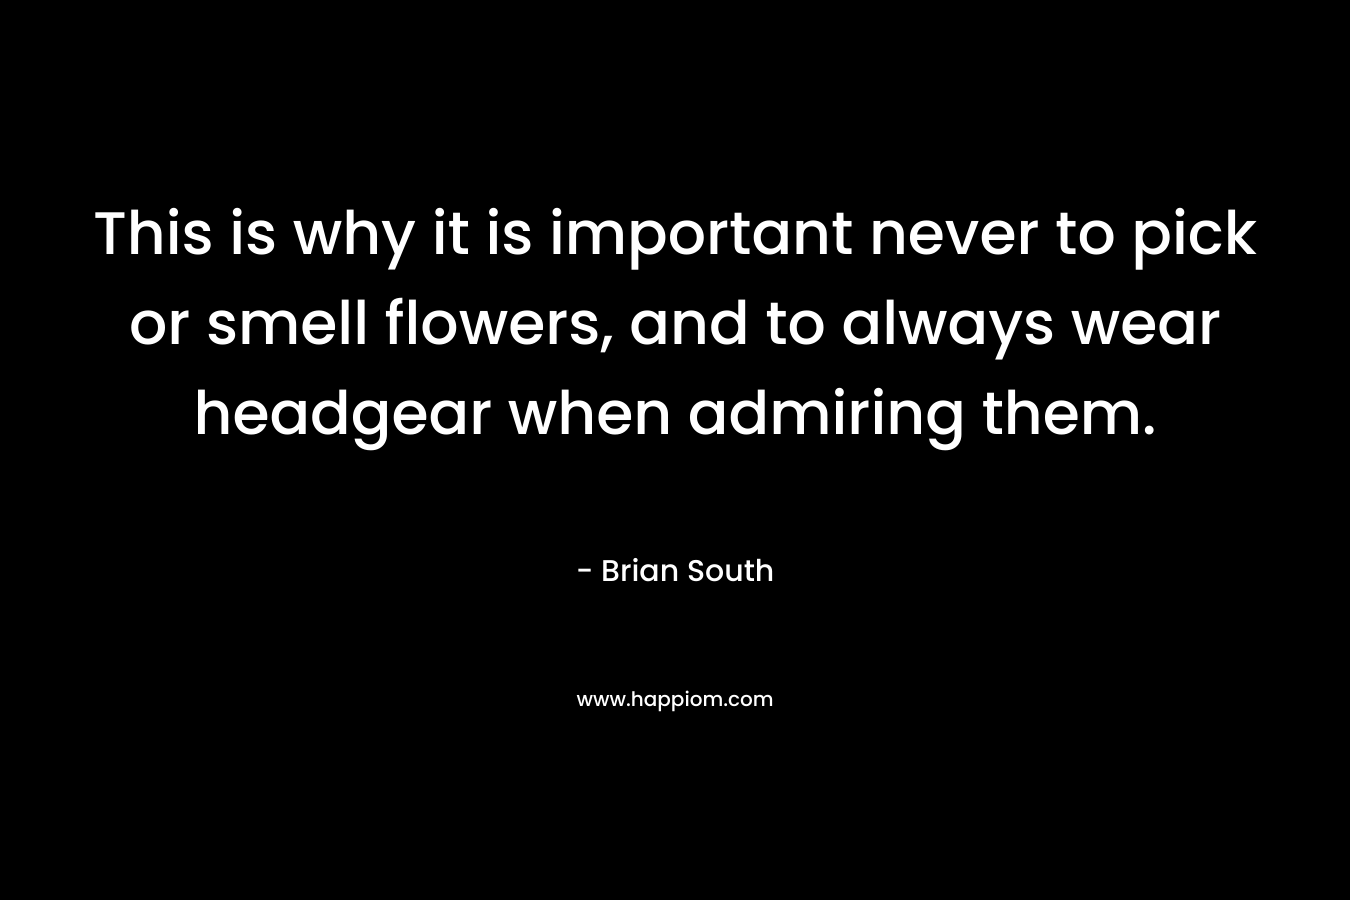 This is why it is important never to pick or smell flowers, and to always wear headgear when admiring them.